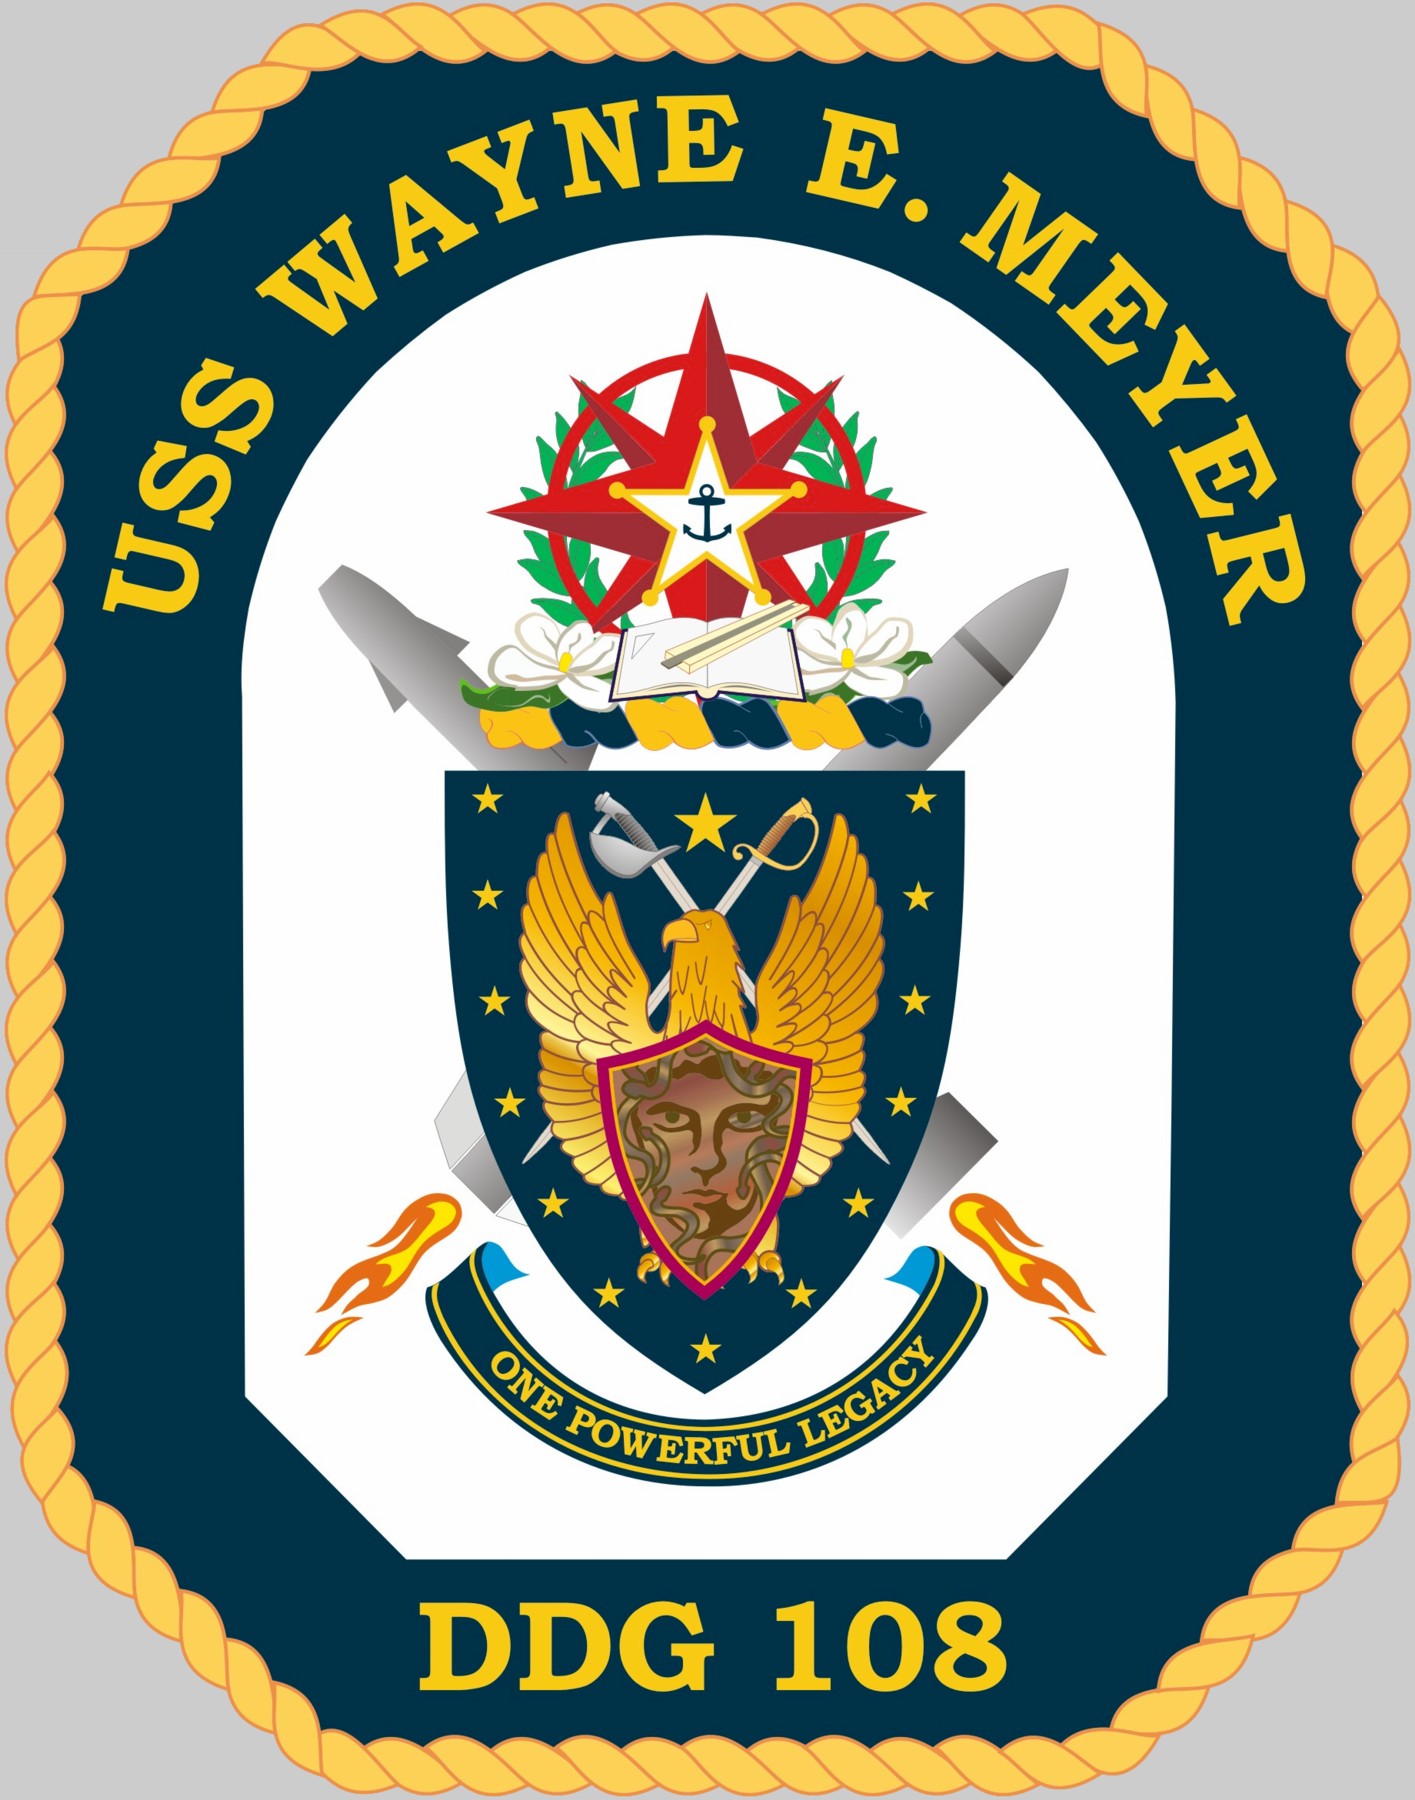 ddg-108 uss wayne e. meyer crest insignia patch badge arleigh burke class guided missile destroyer aegis us navy 02c